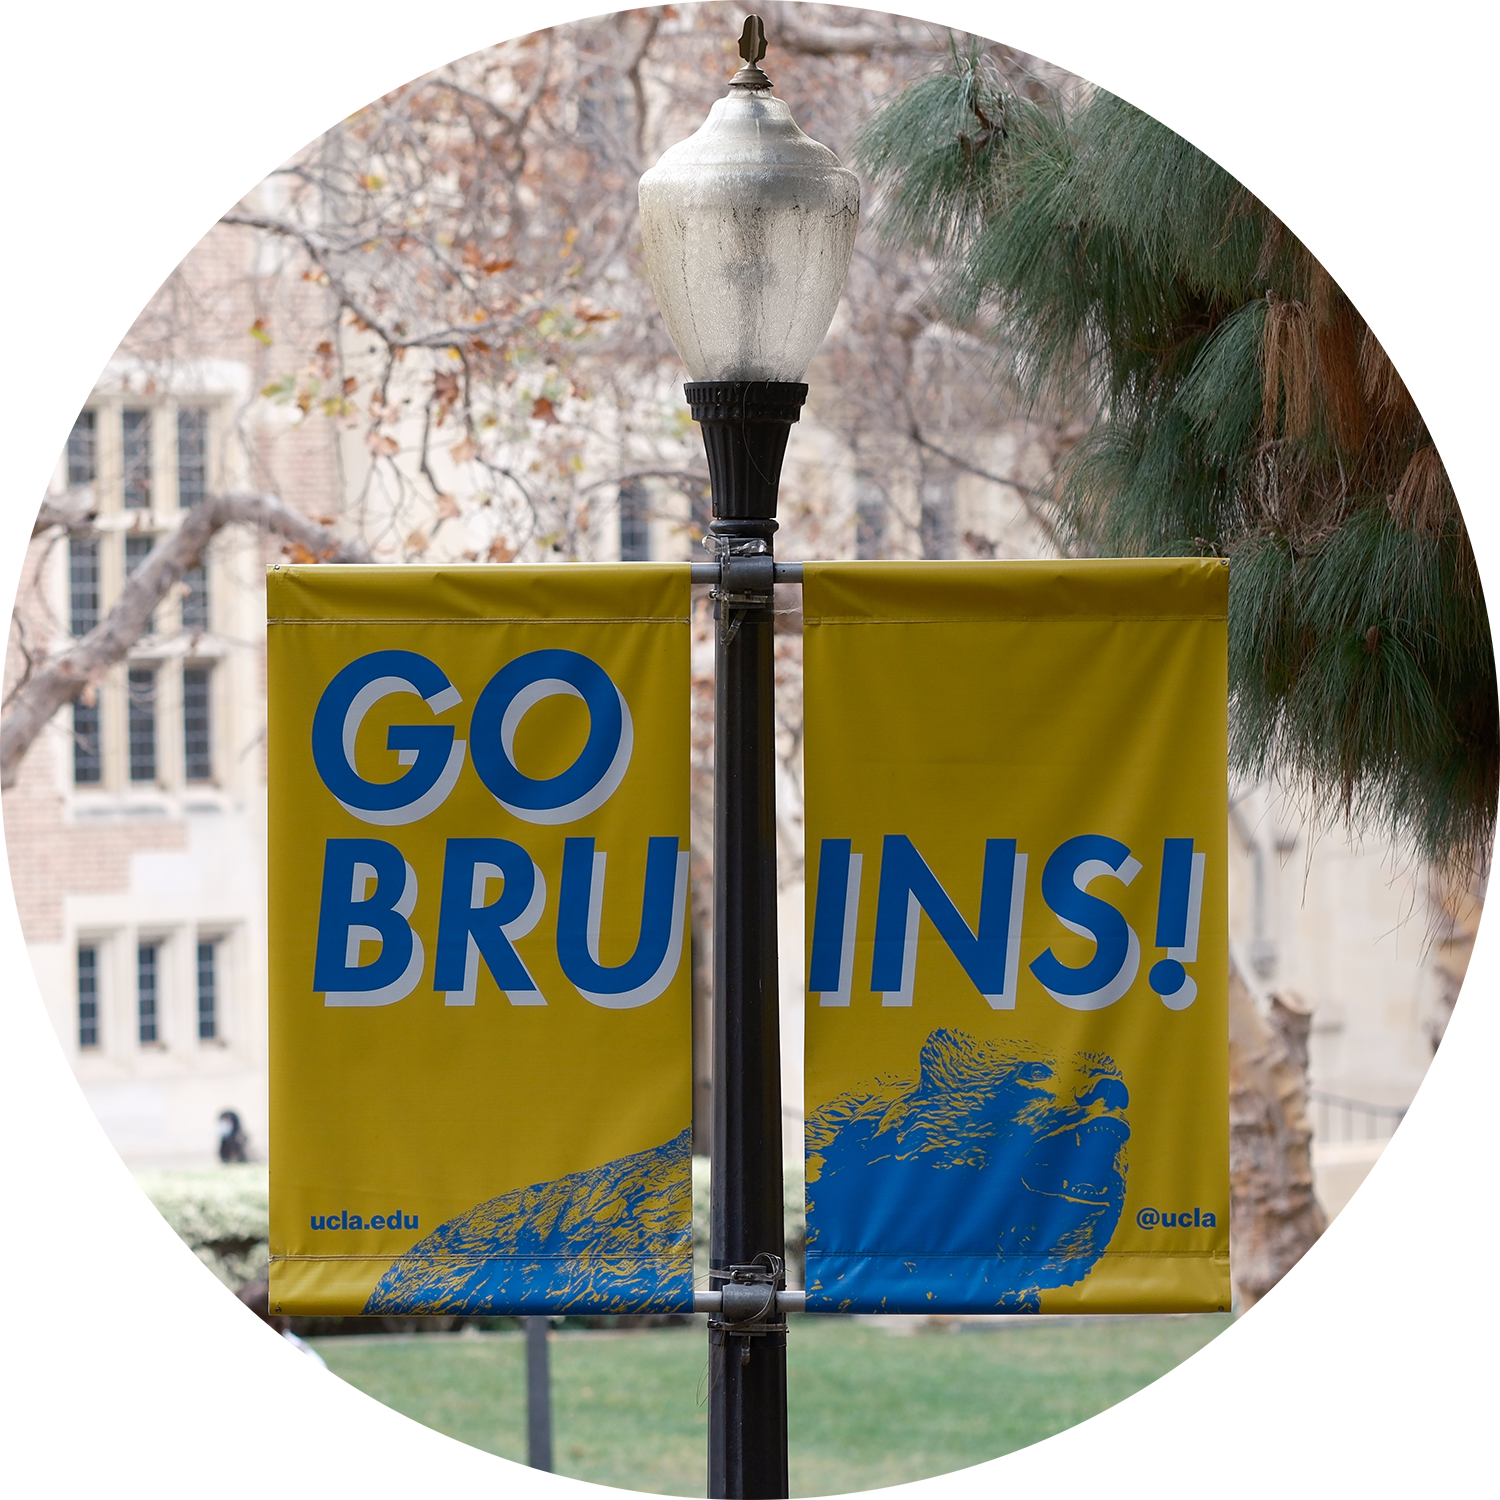 A “Go Bruins!” sign is prominently displayed from a lamppost and two students walk in the background. 